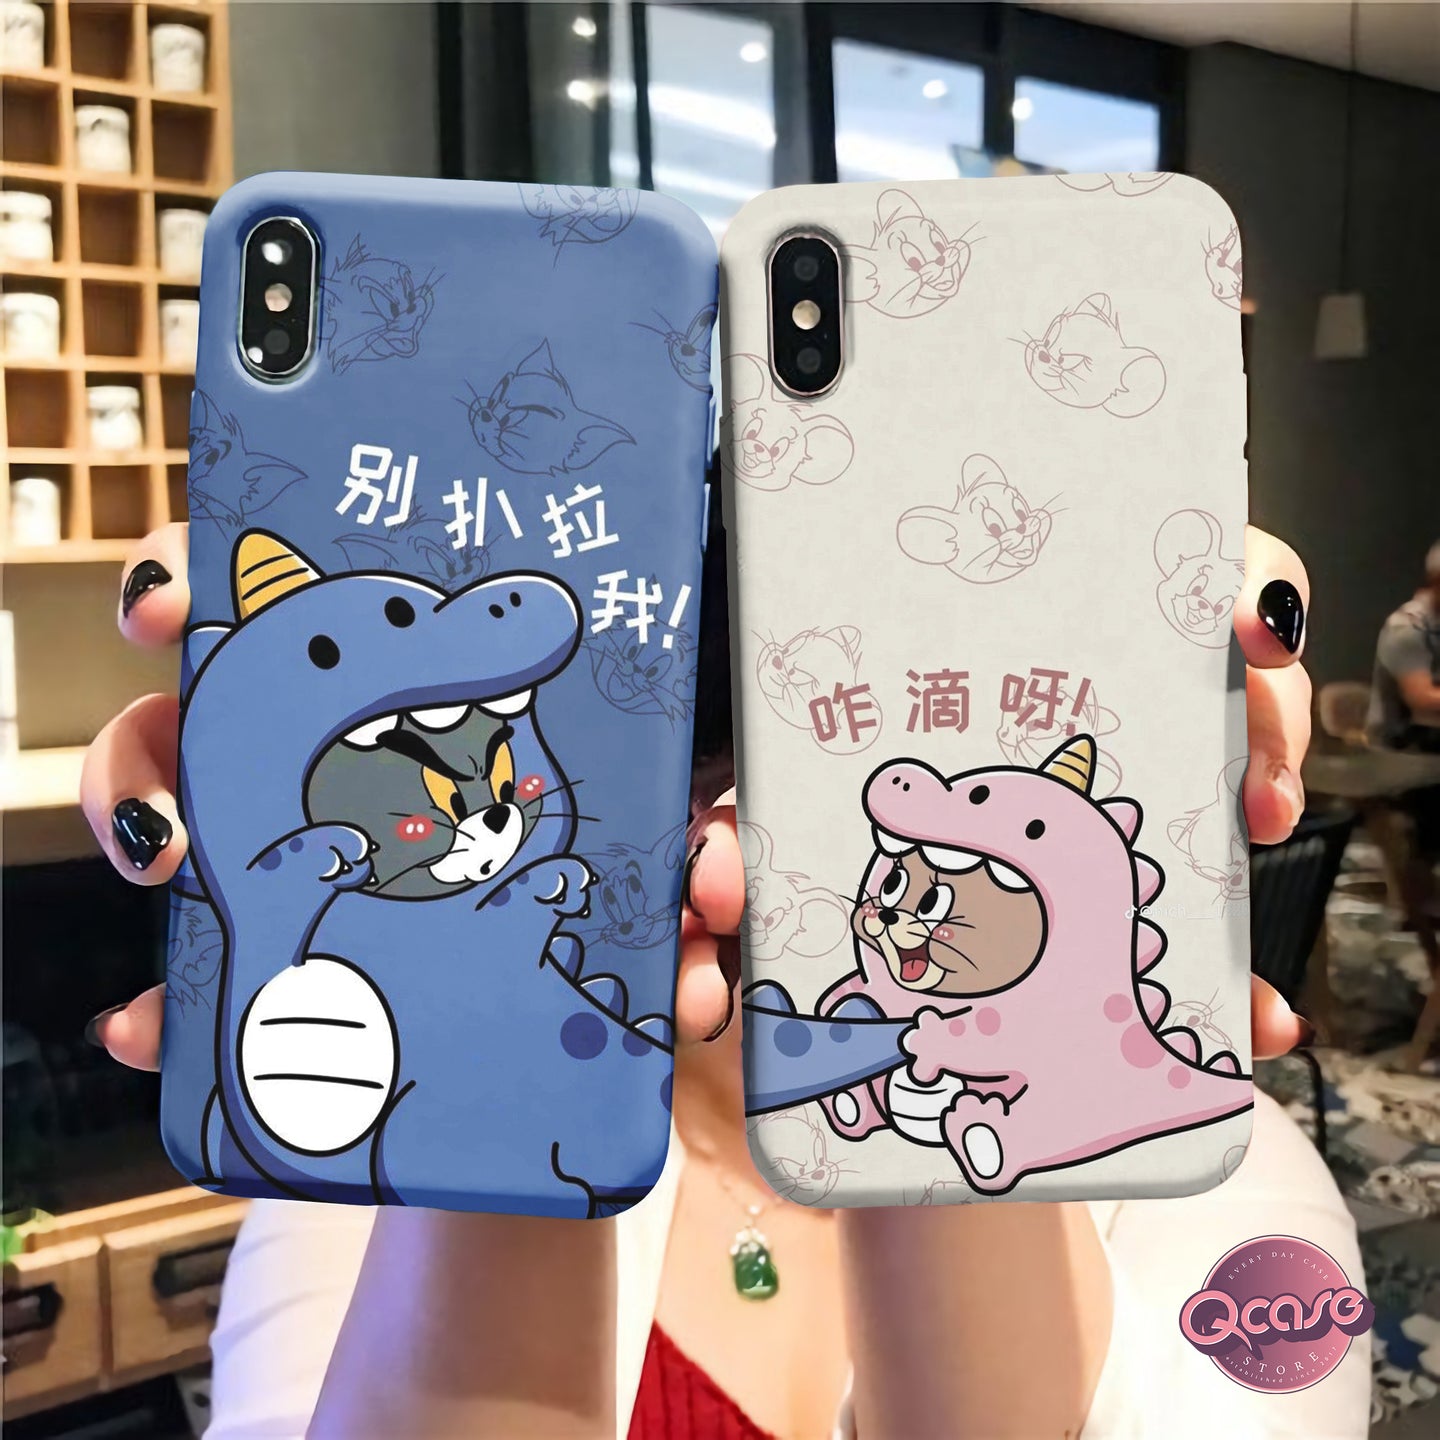 Tom and Jerry couples phone cases